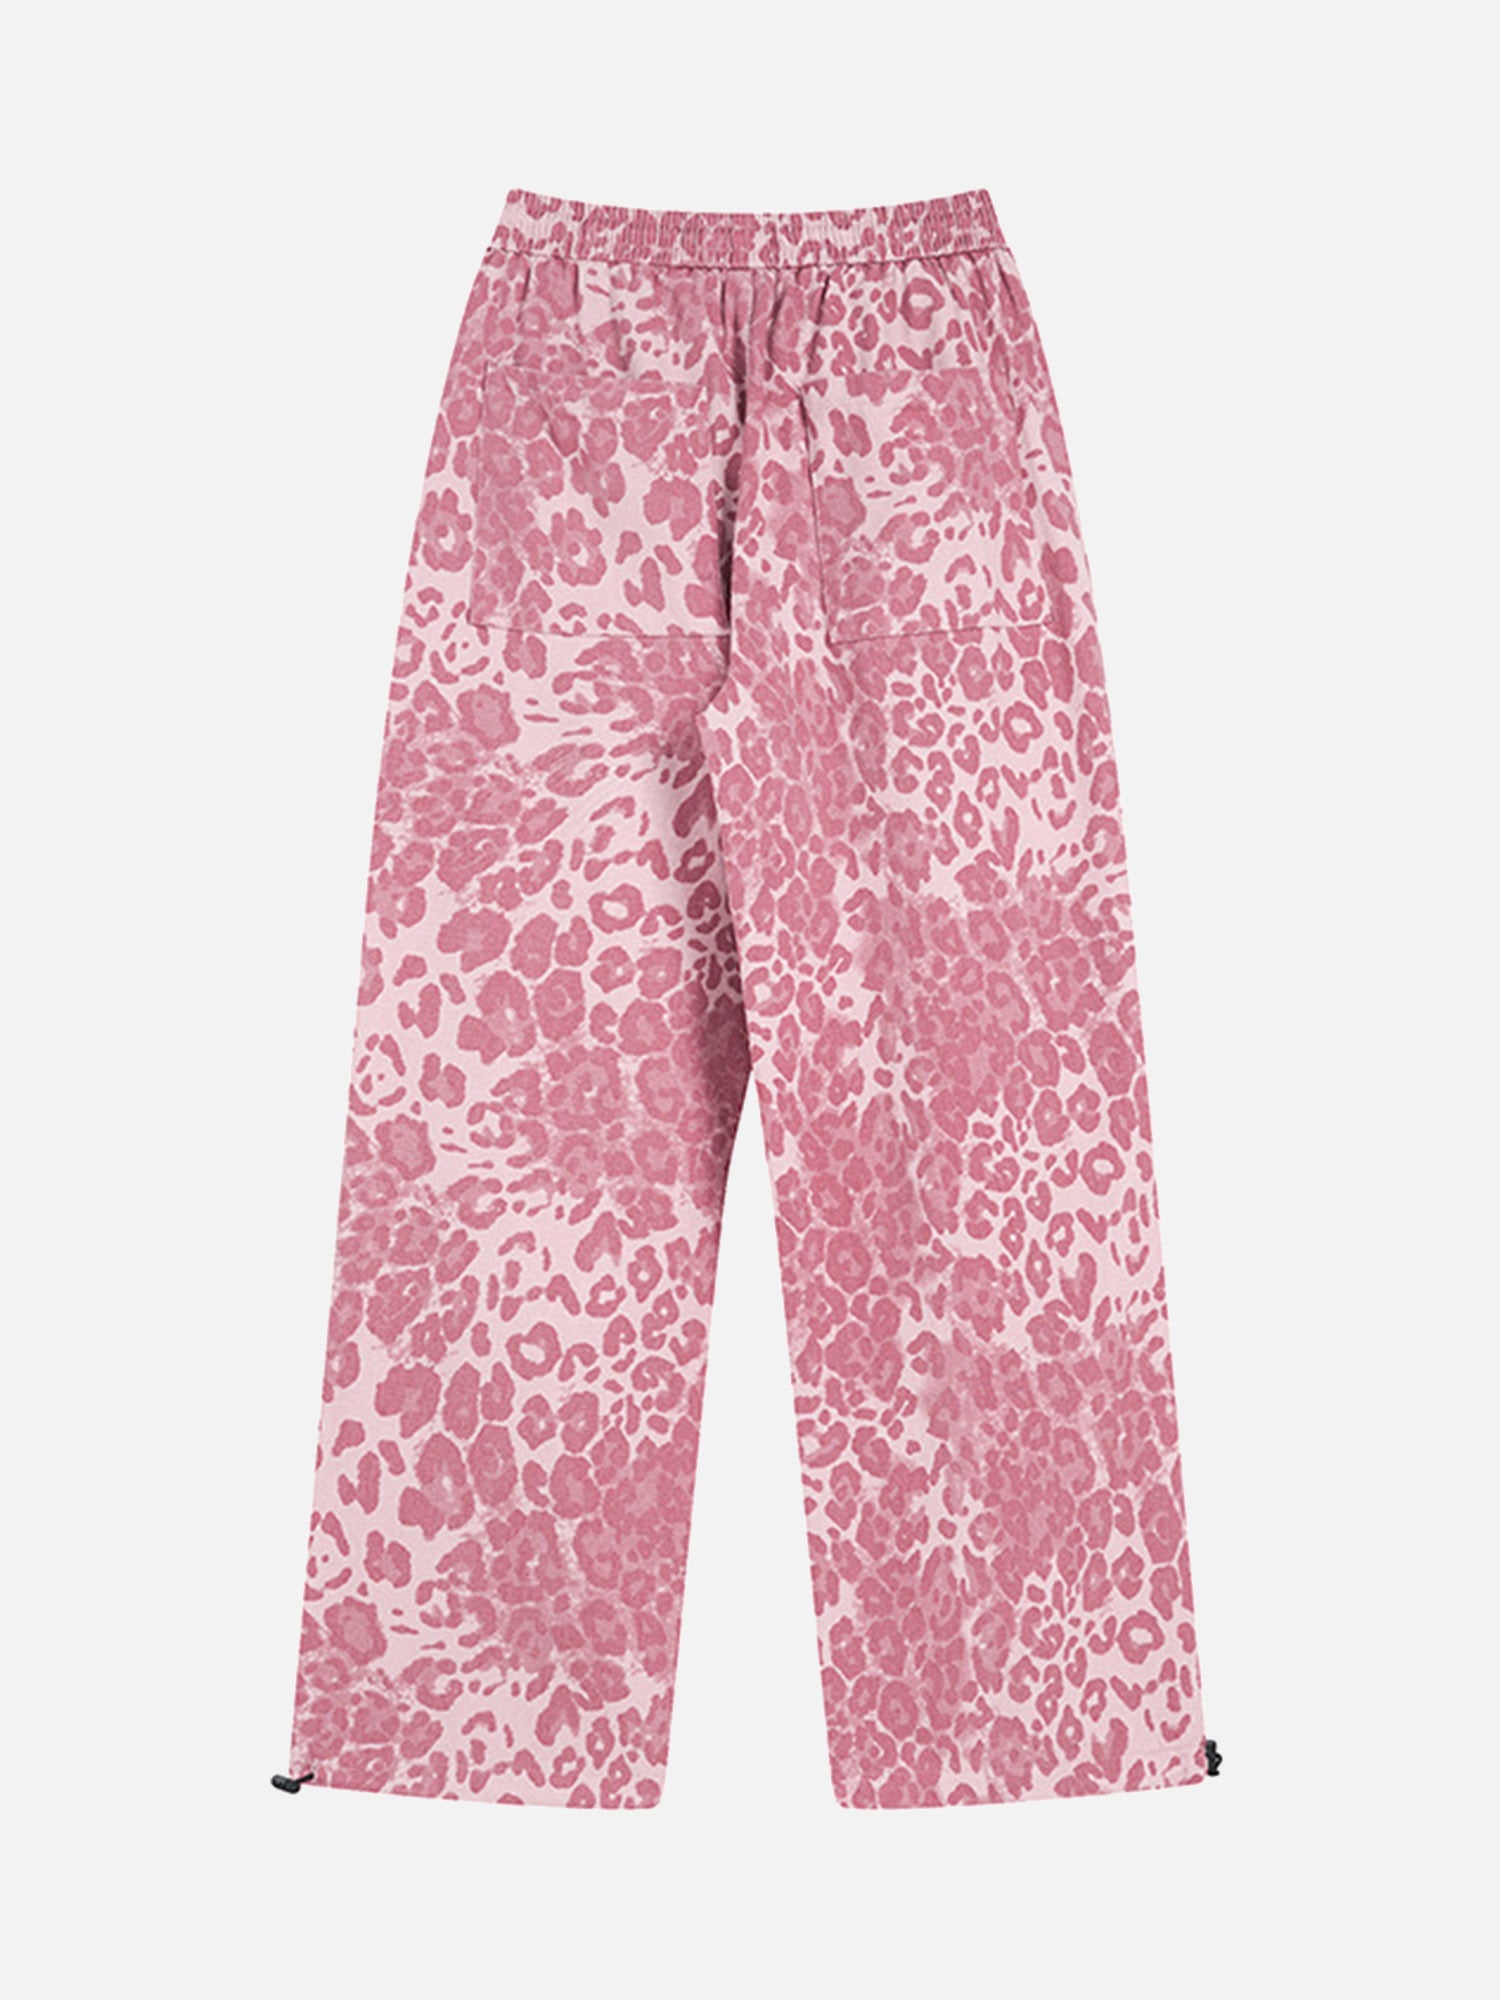 Thesupermade Retro Leopard Print Pink Wide-leg Floor-length Casual Pants